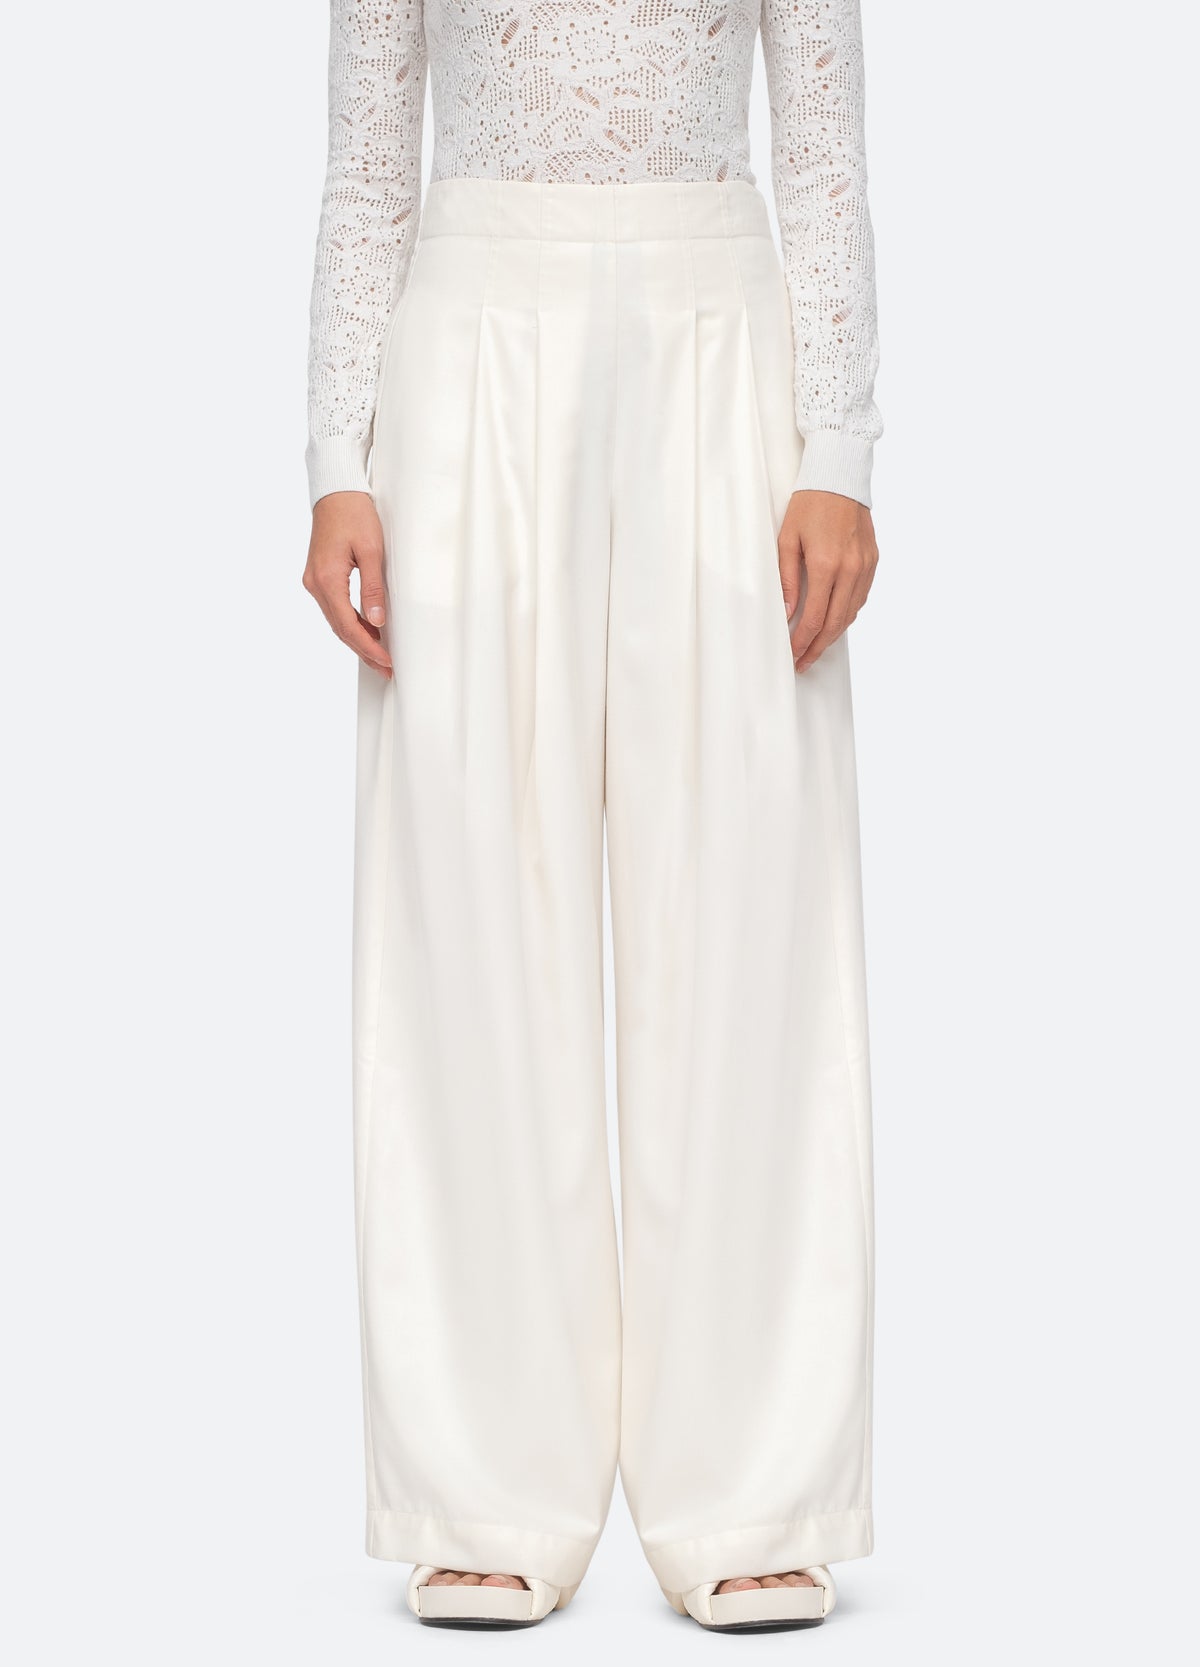 cream-aerin pants-front view - 7